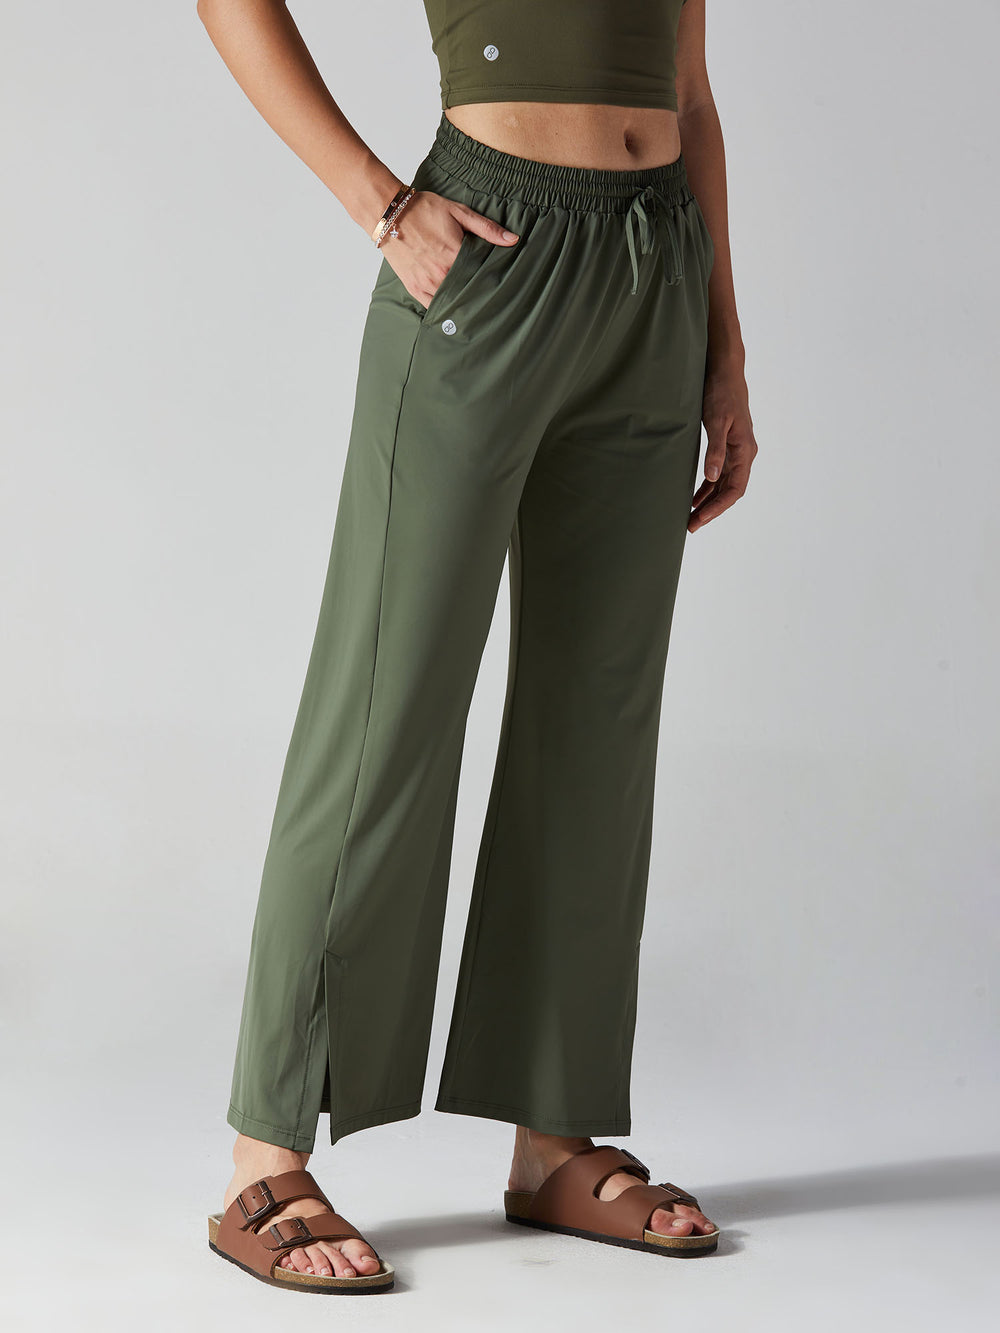 Shop from the Women's Bottomwear only on CAVA athleisure – CAVA